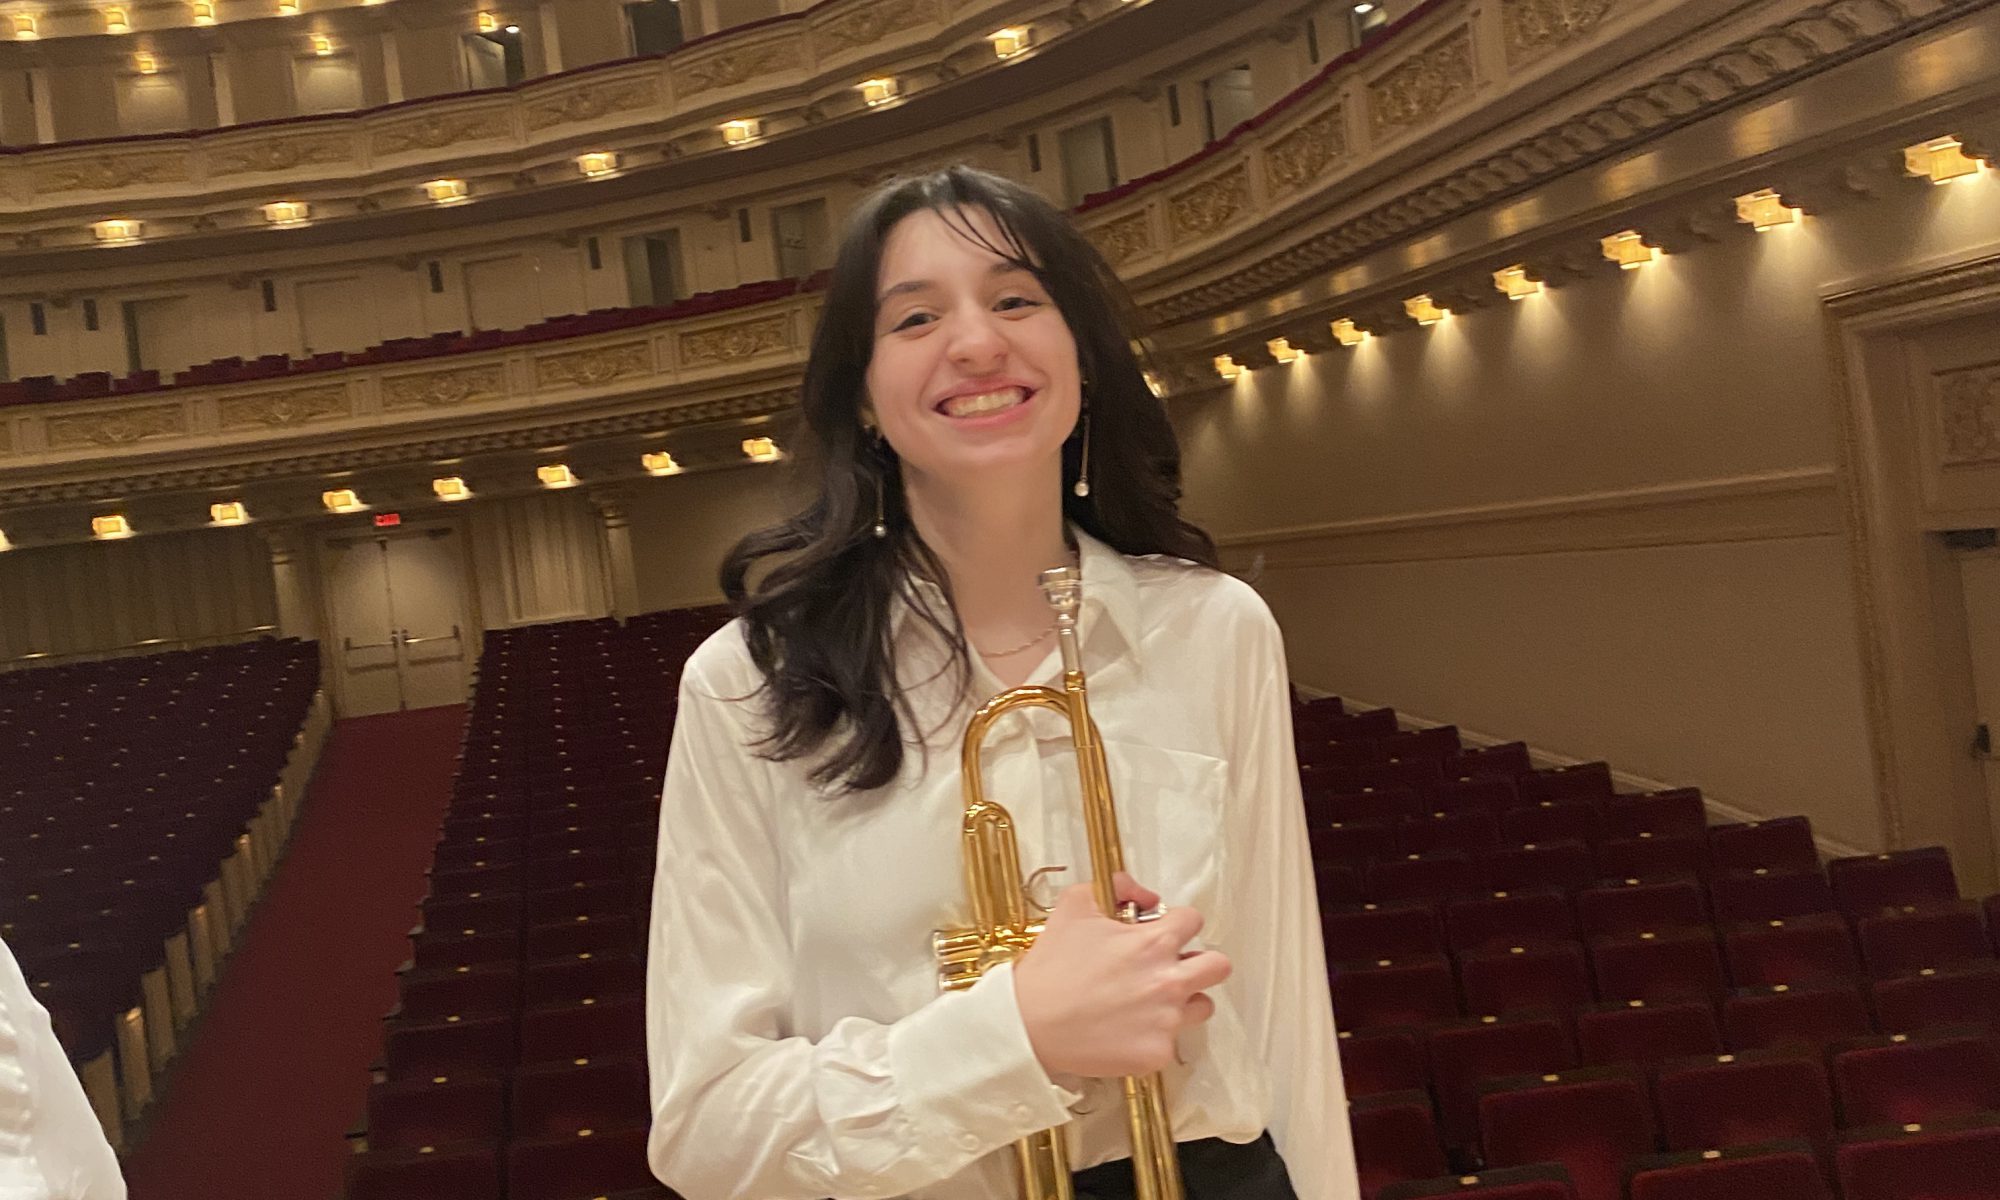 VCHS Junior, Amelia, is shown on stage at Carnegie Hall with her trumpet where she was selected to participate in the The Honors Performance Series by WorldStrides.